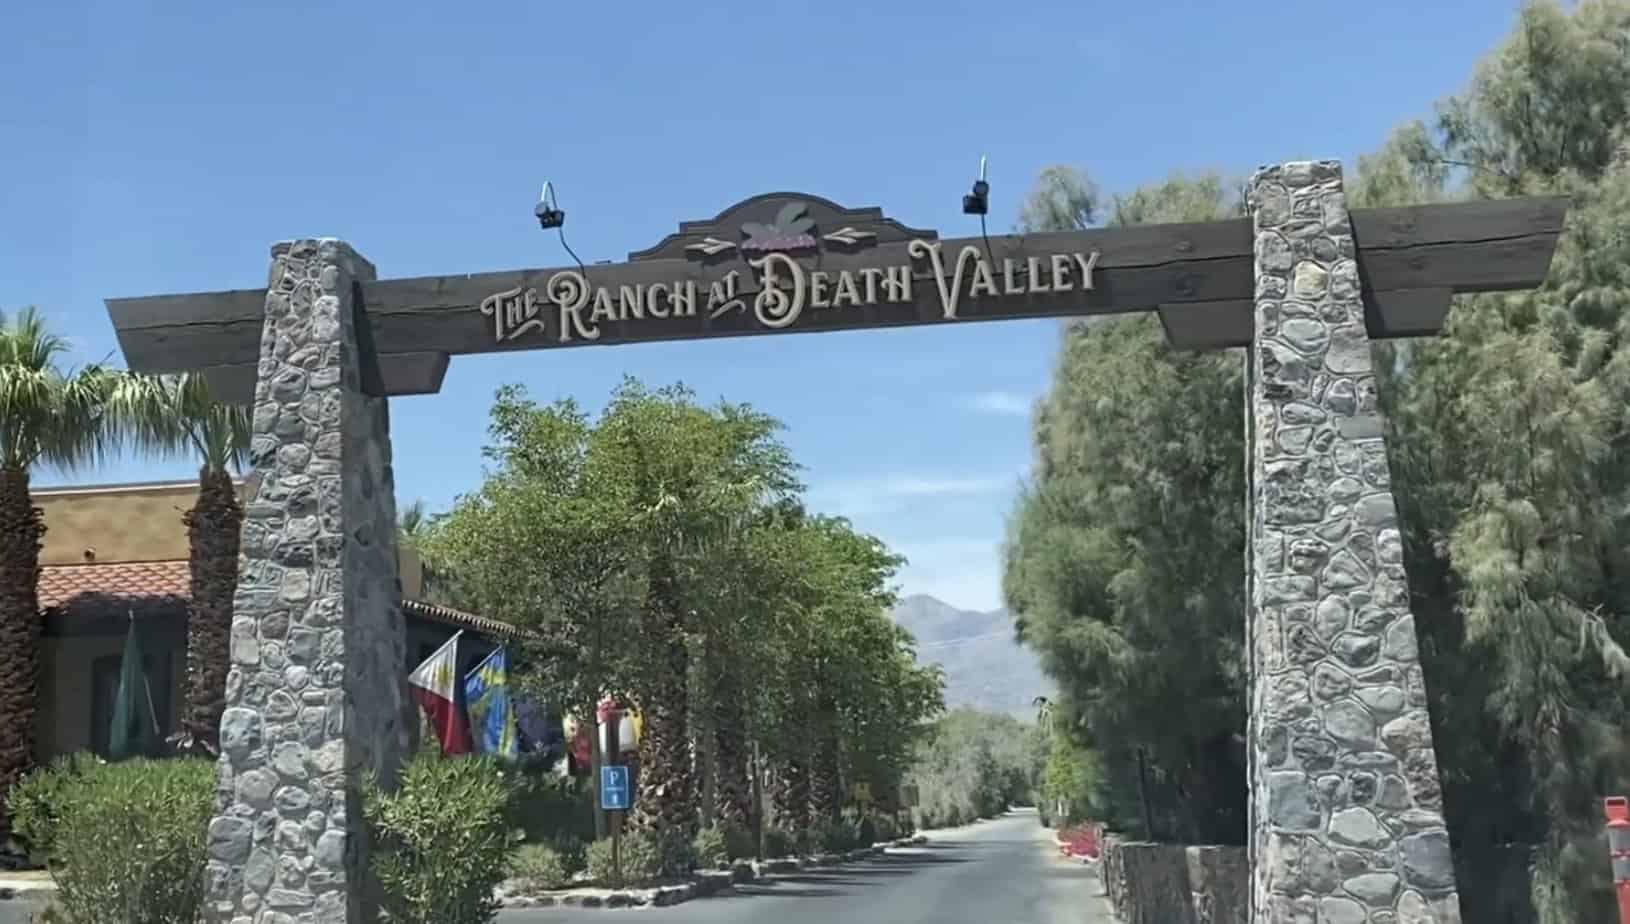 The Ranch at Death Valley